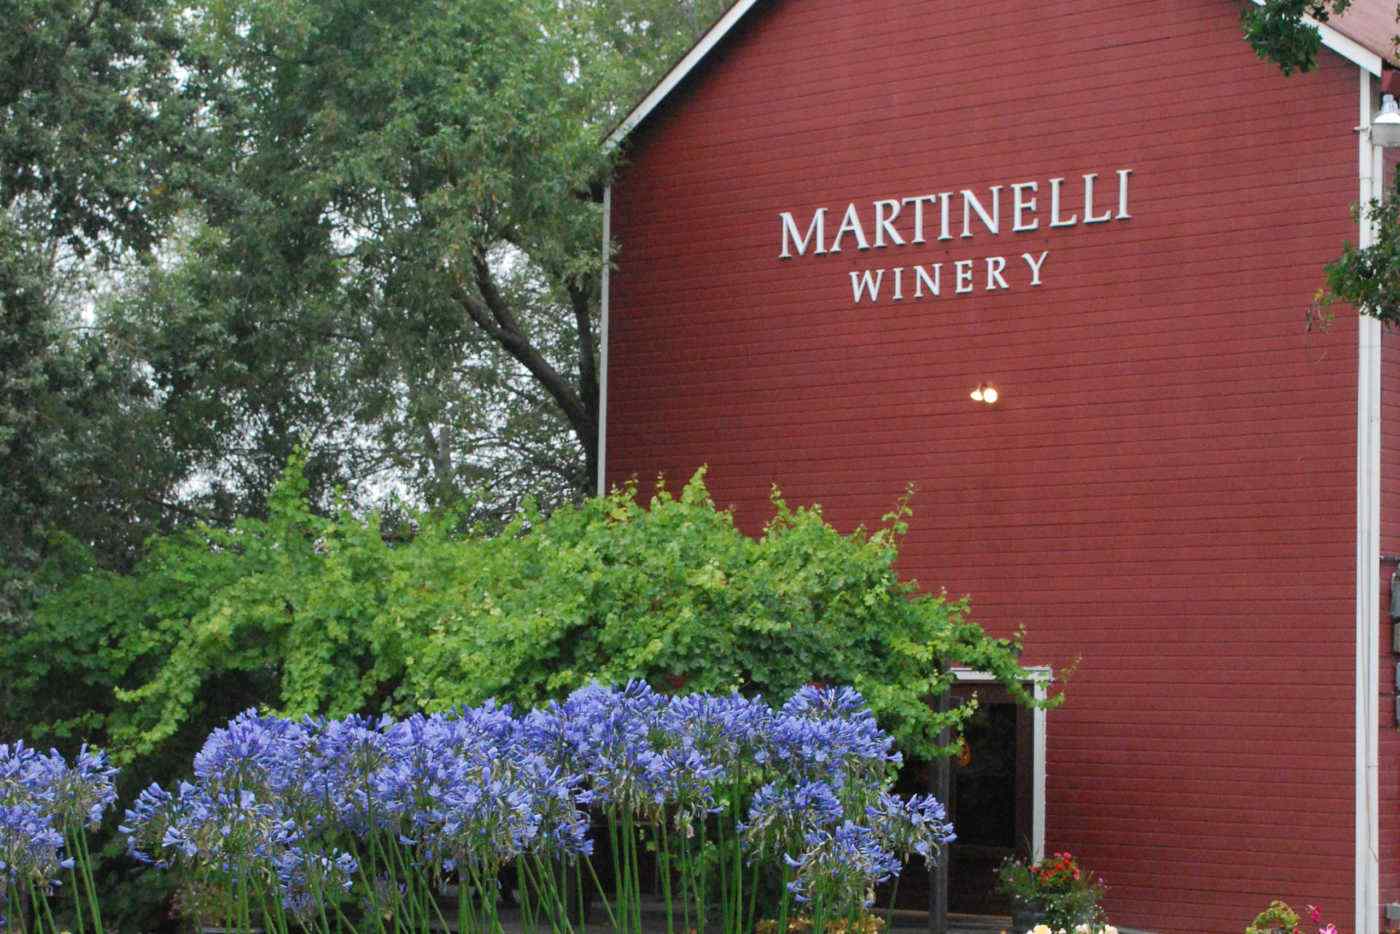 Front of Martinelli winery tasting room with flowers